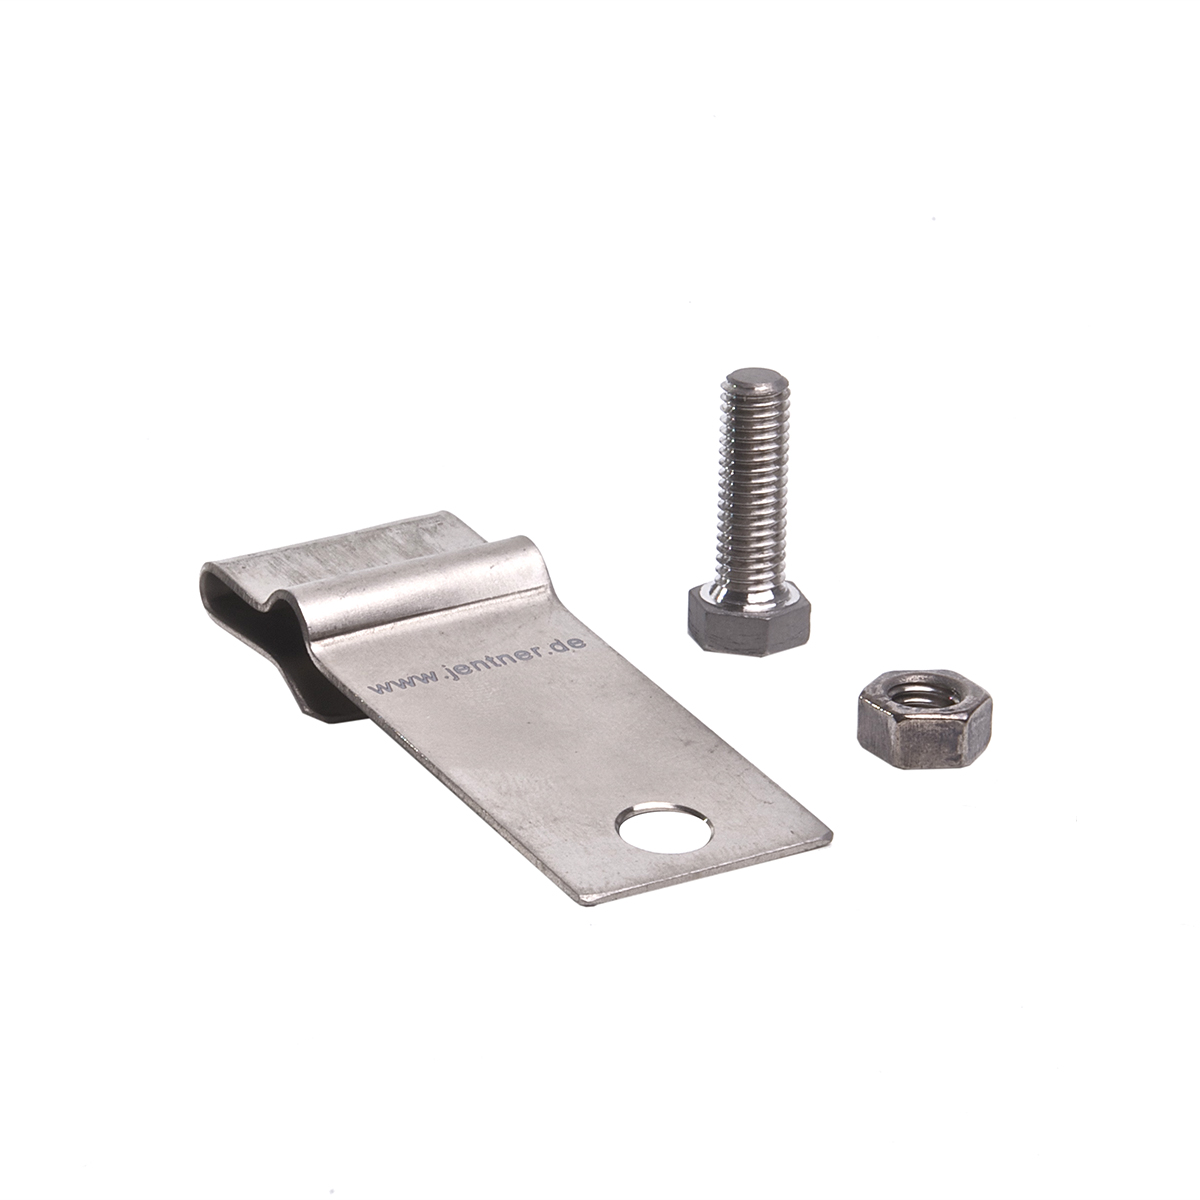 Titanium-fixation for anodes, 80 x 20  mm with screws